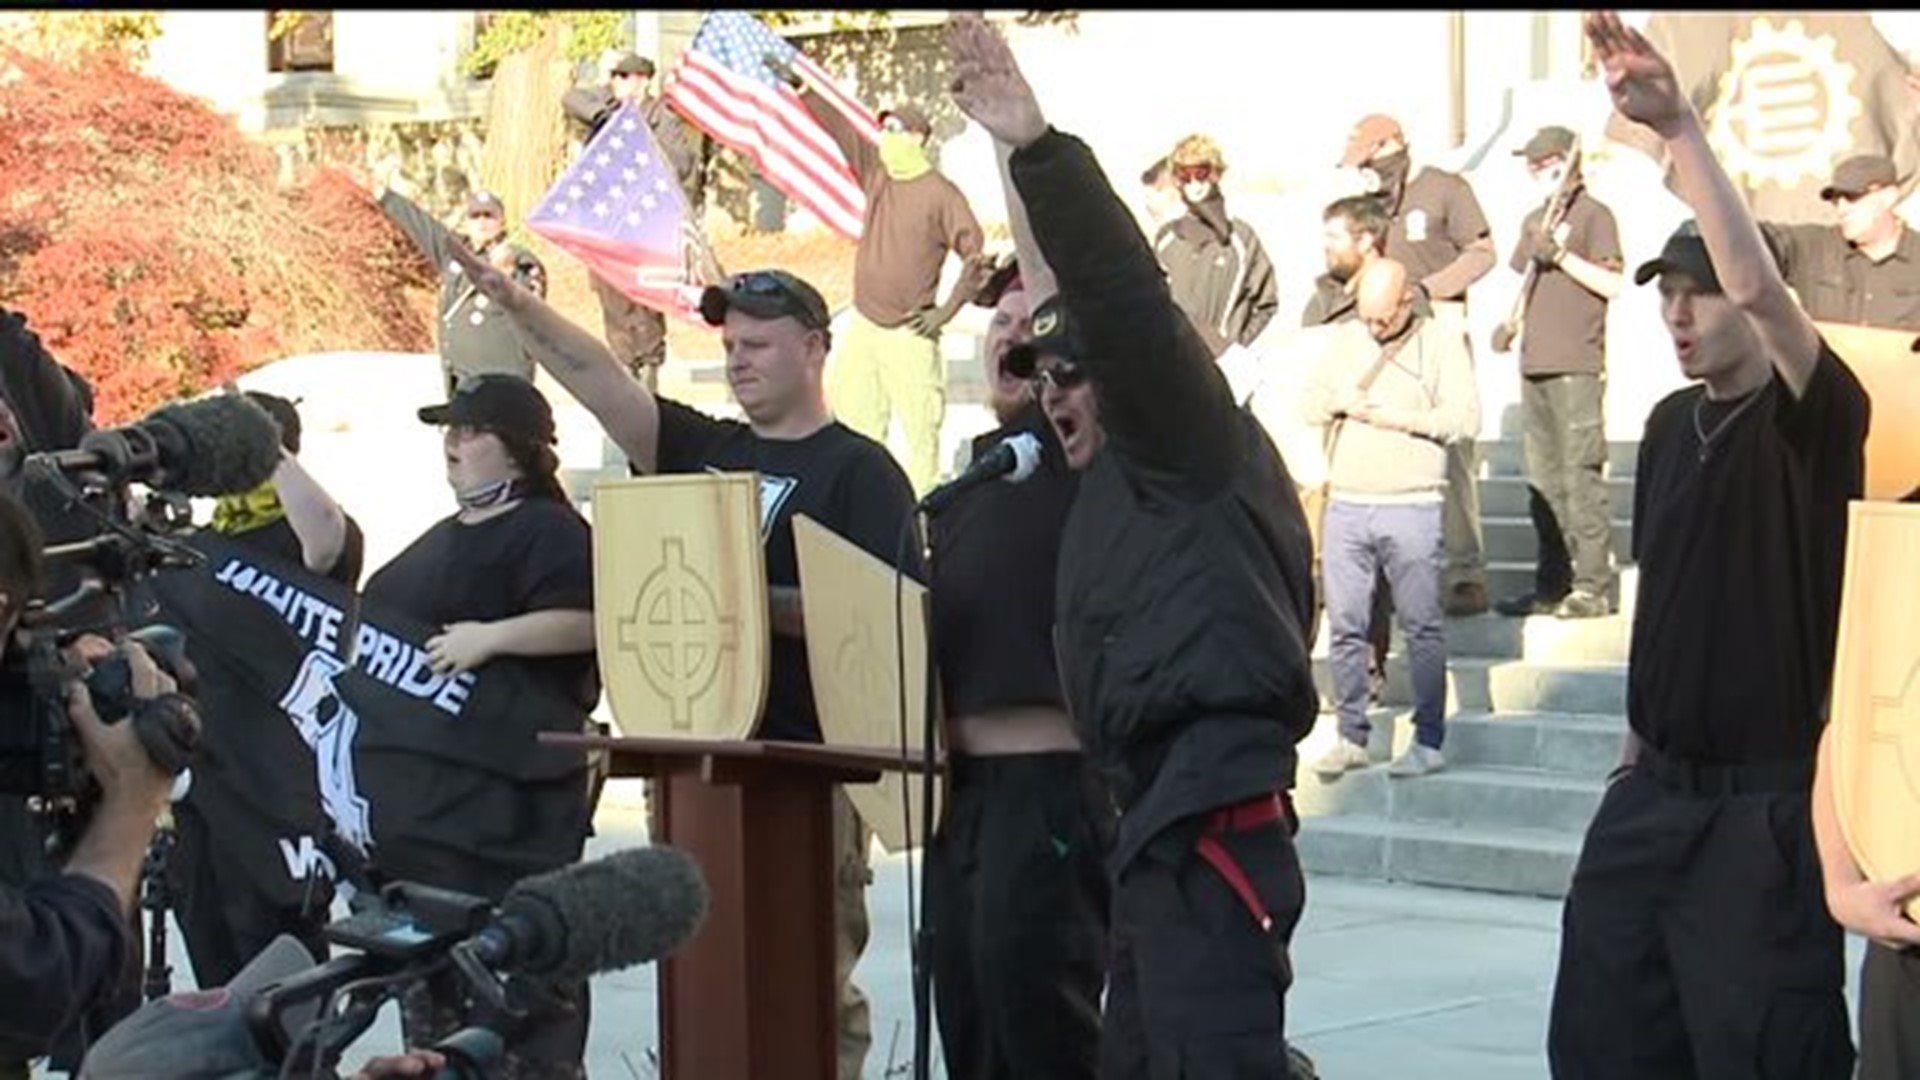 National Socialist Movement rally brings out protestors and peaceful opposition to Harrisburg